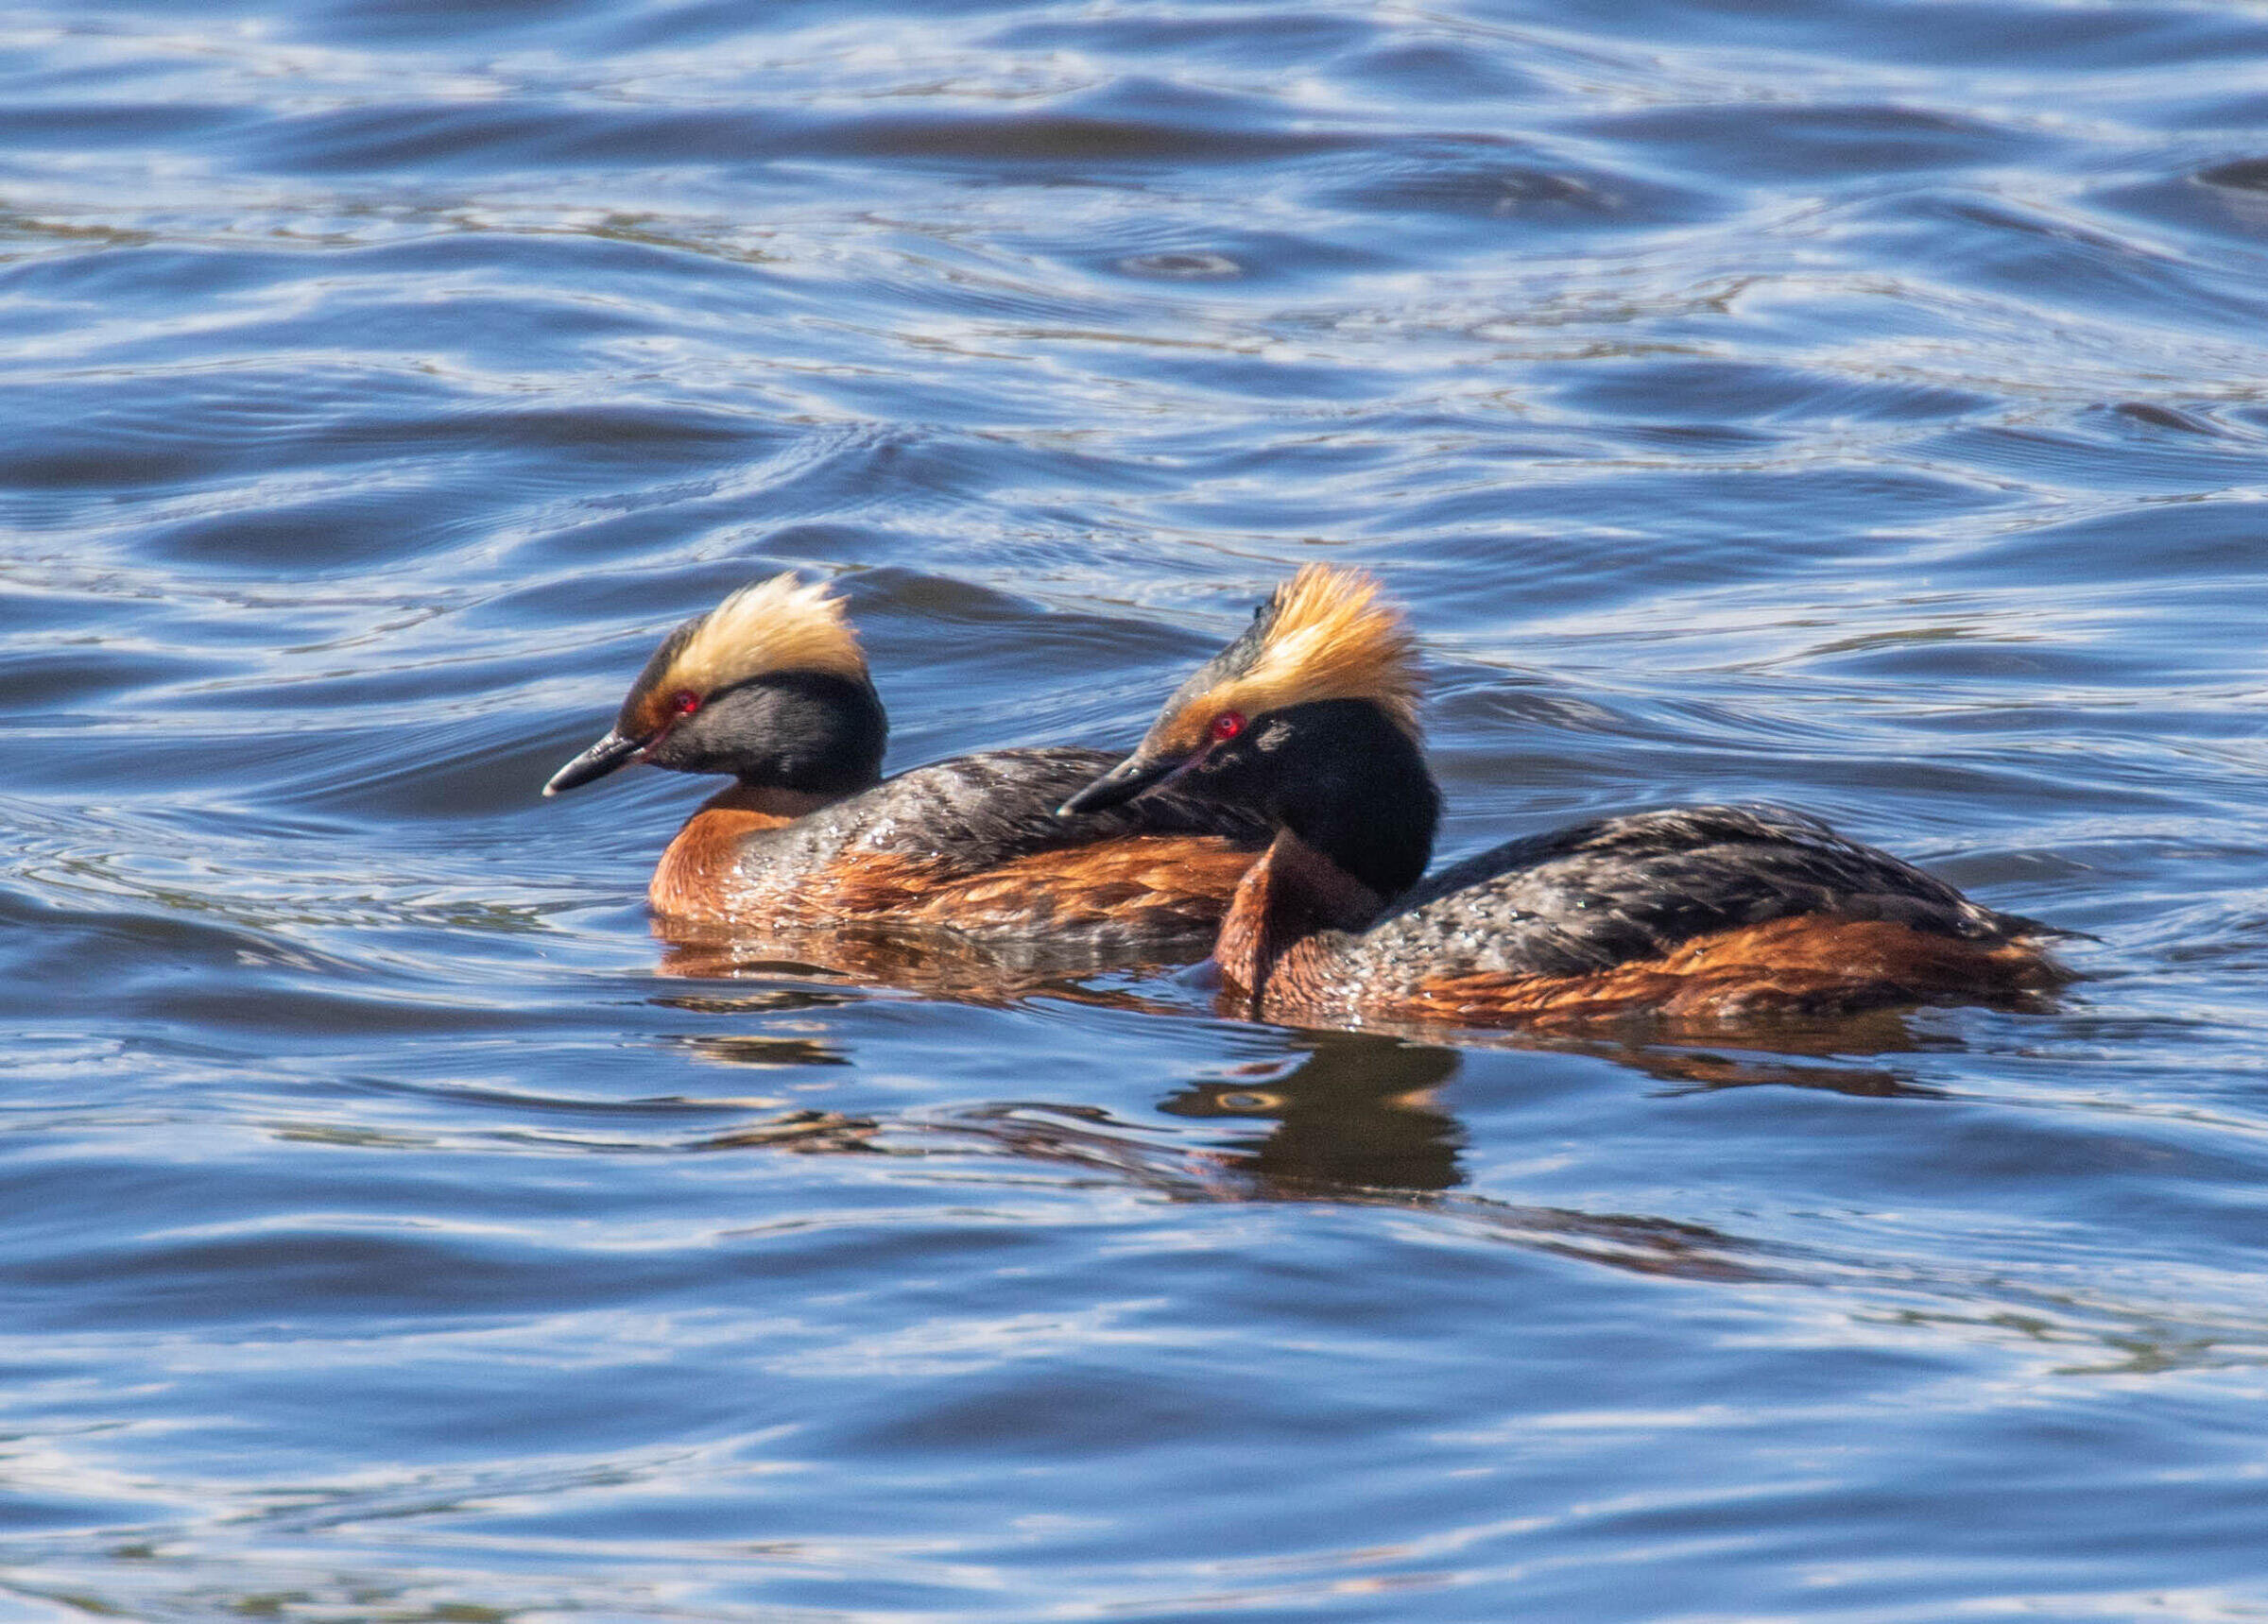 Horned grebe - breeding adults. Photo: David Larson/Flickr (CC BY-NC-ND 2.0